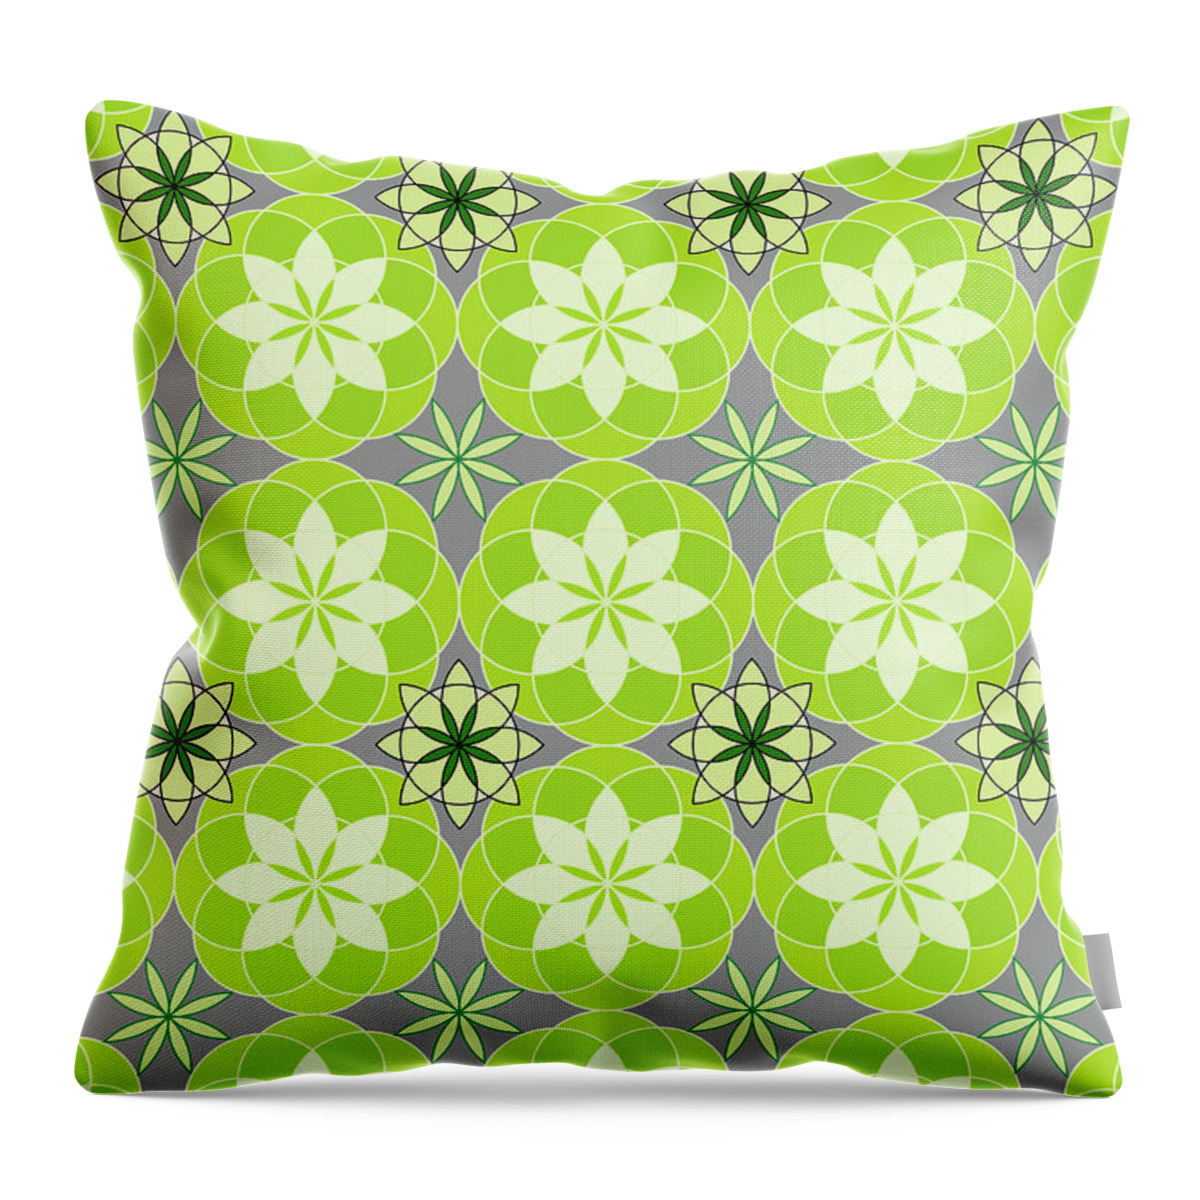 Floral Pattern Throw Pillow featuring the digital art Floral Pattern - Surface Design Shades of Green by Patricia Awapara